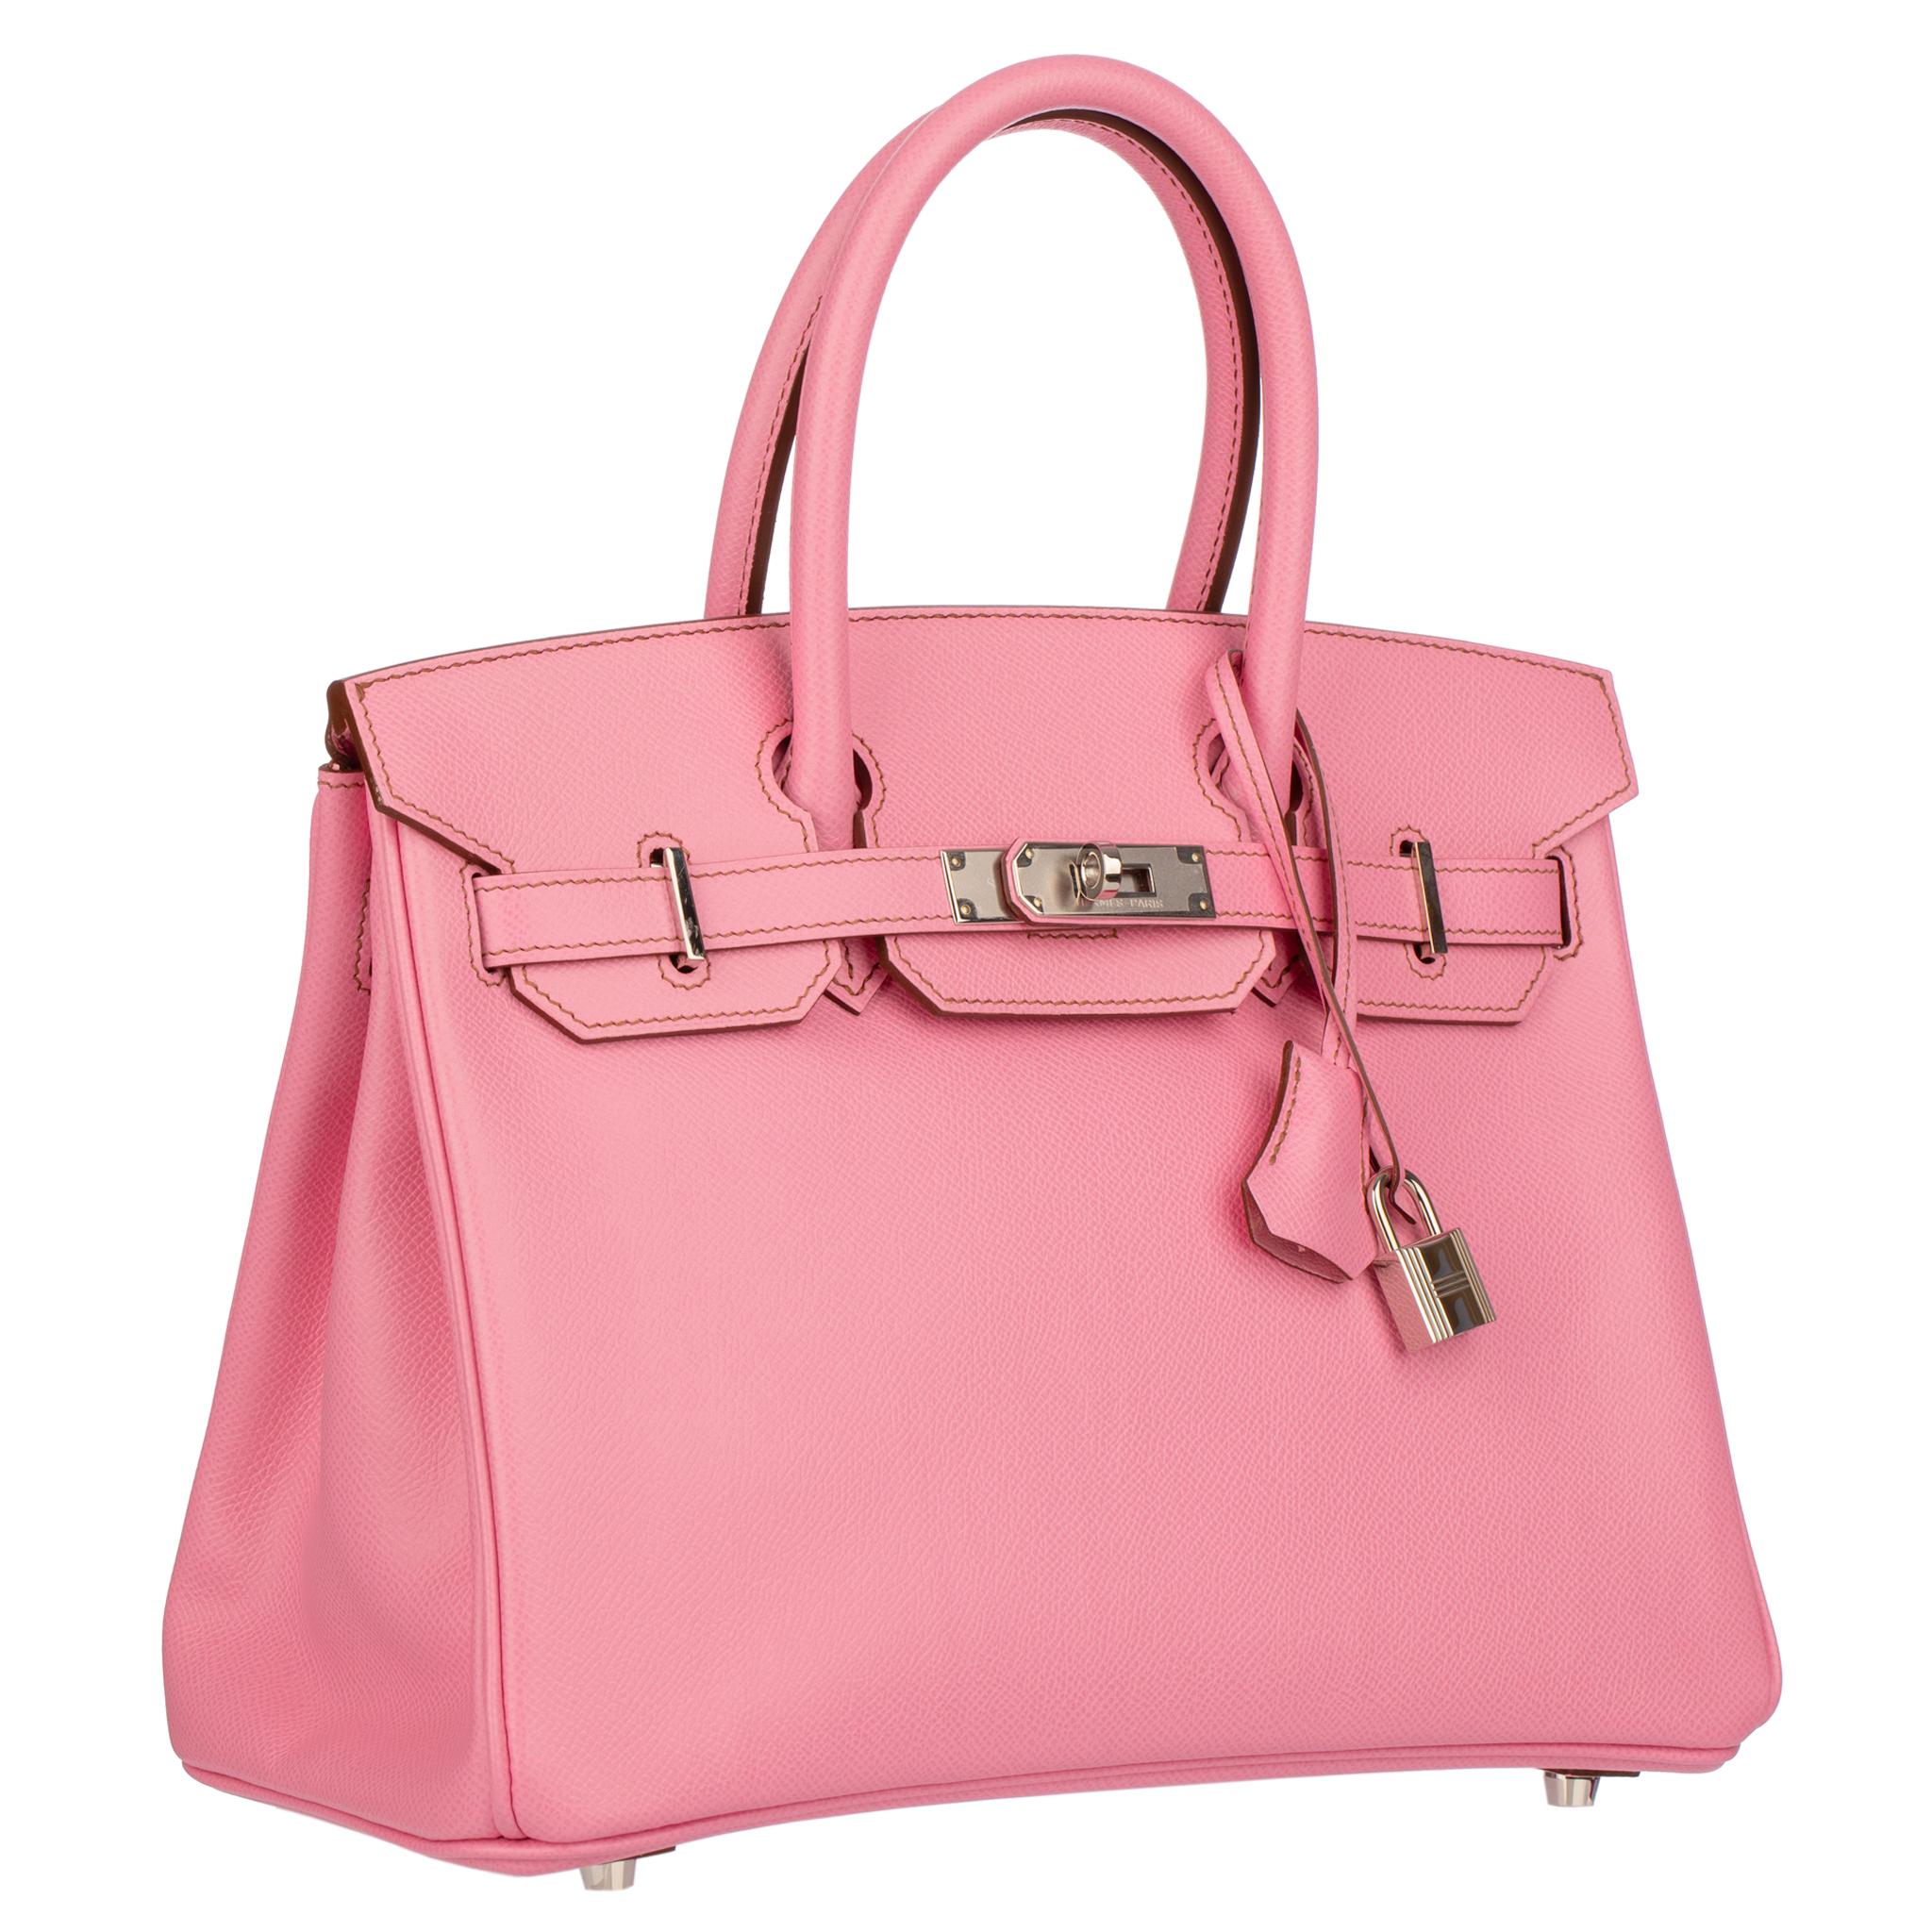 The Hermes Birkin 30cm in Bubblegum Epsom Leather with Palladium Hardware is a vibrant and captivating symbol of luxury and sophistication.

Crafted meticulously by Hermes artisans, this iconic bag boasts the stunning Bubblegum Epsom Leather,